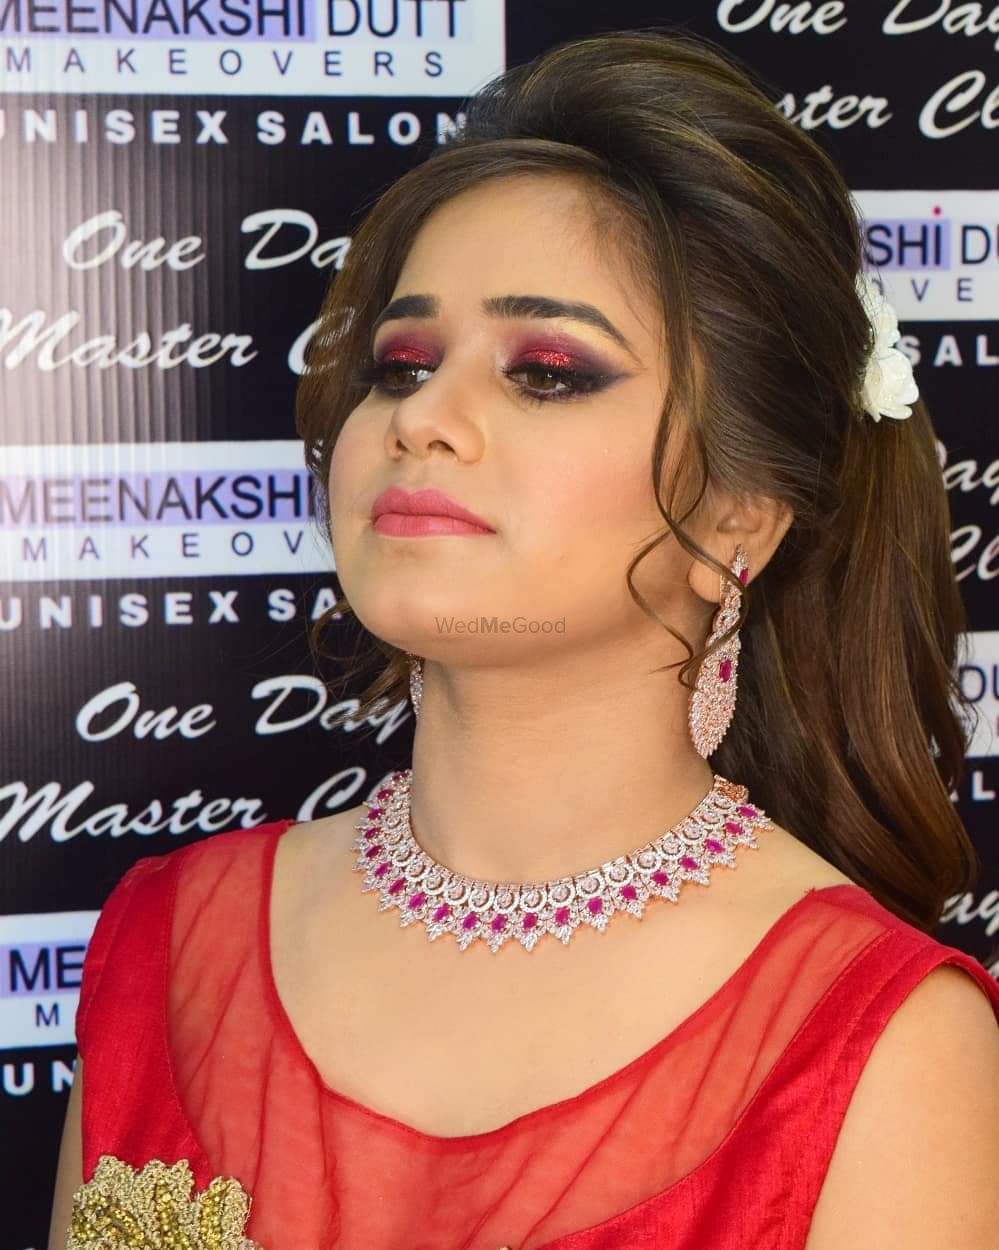 Photo From Cocktail Makeup Look - By Meenakshi Dutt Makeovers Agra